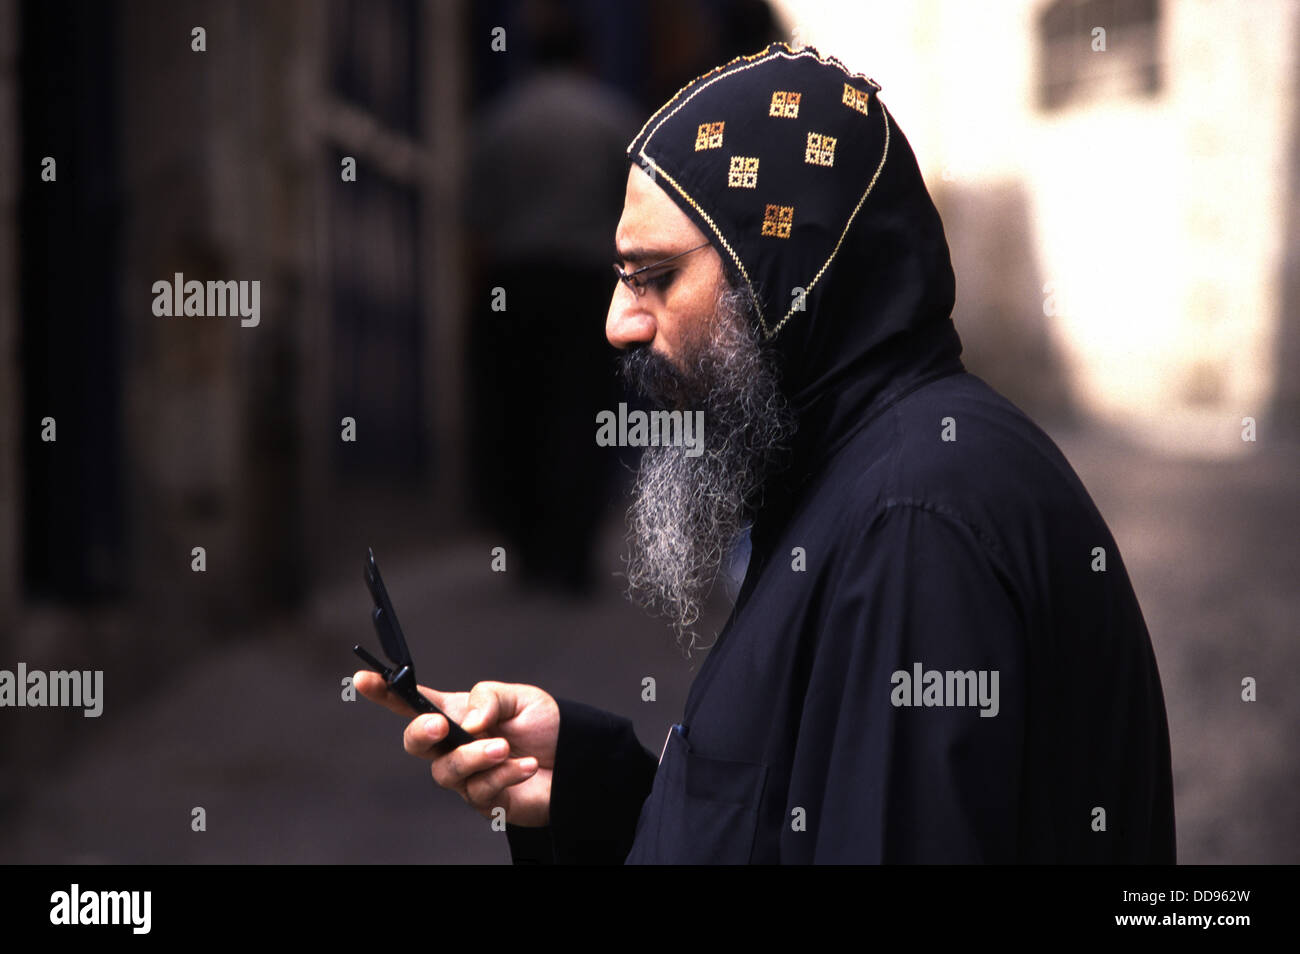 An Assyrian Orthodox Christian priest using mobile phone in the Christian quarter old city of East Jerusalem Israel Stock Photo